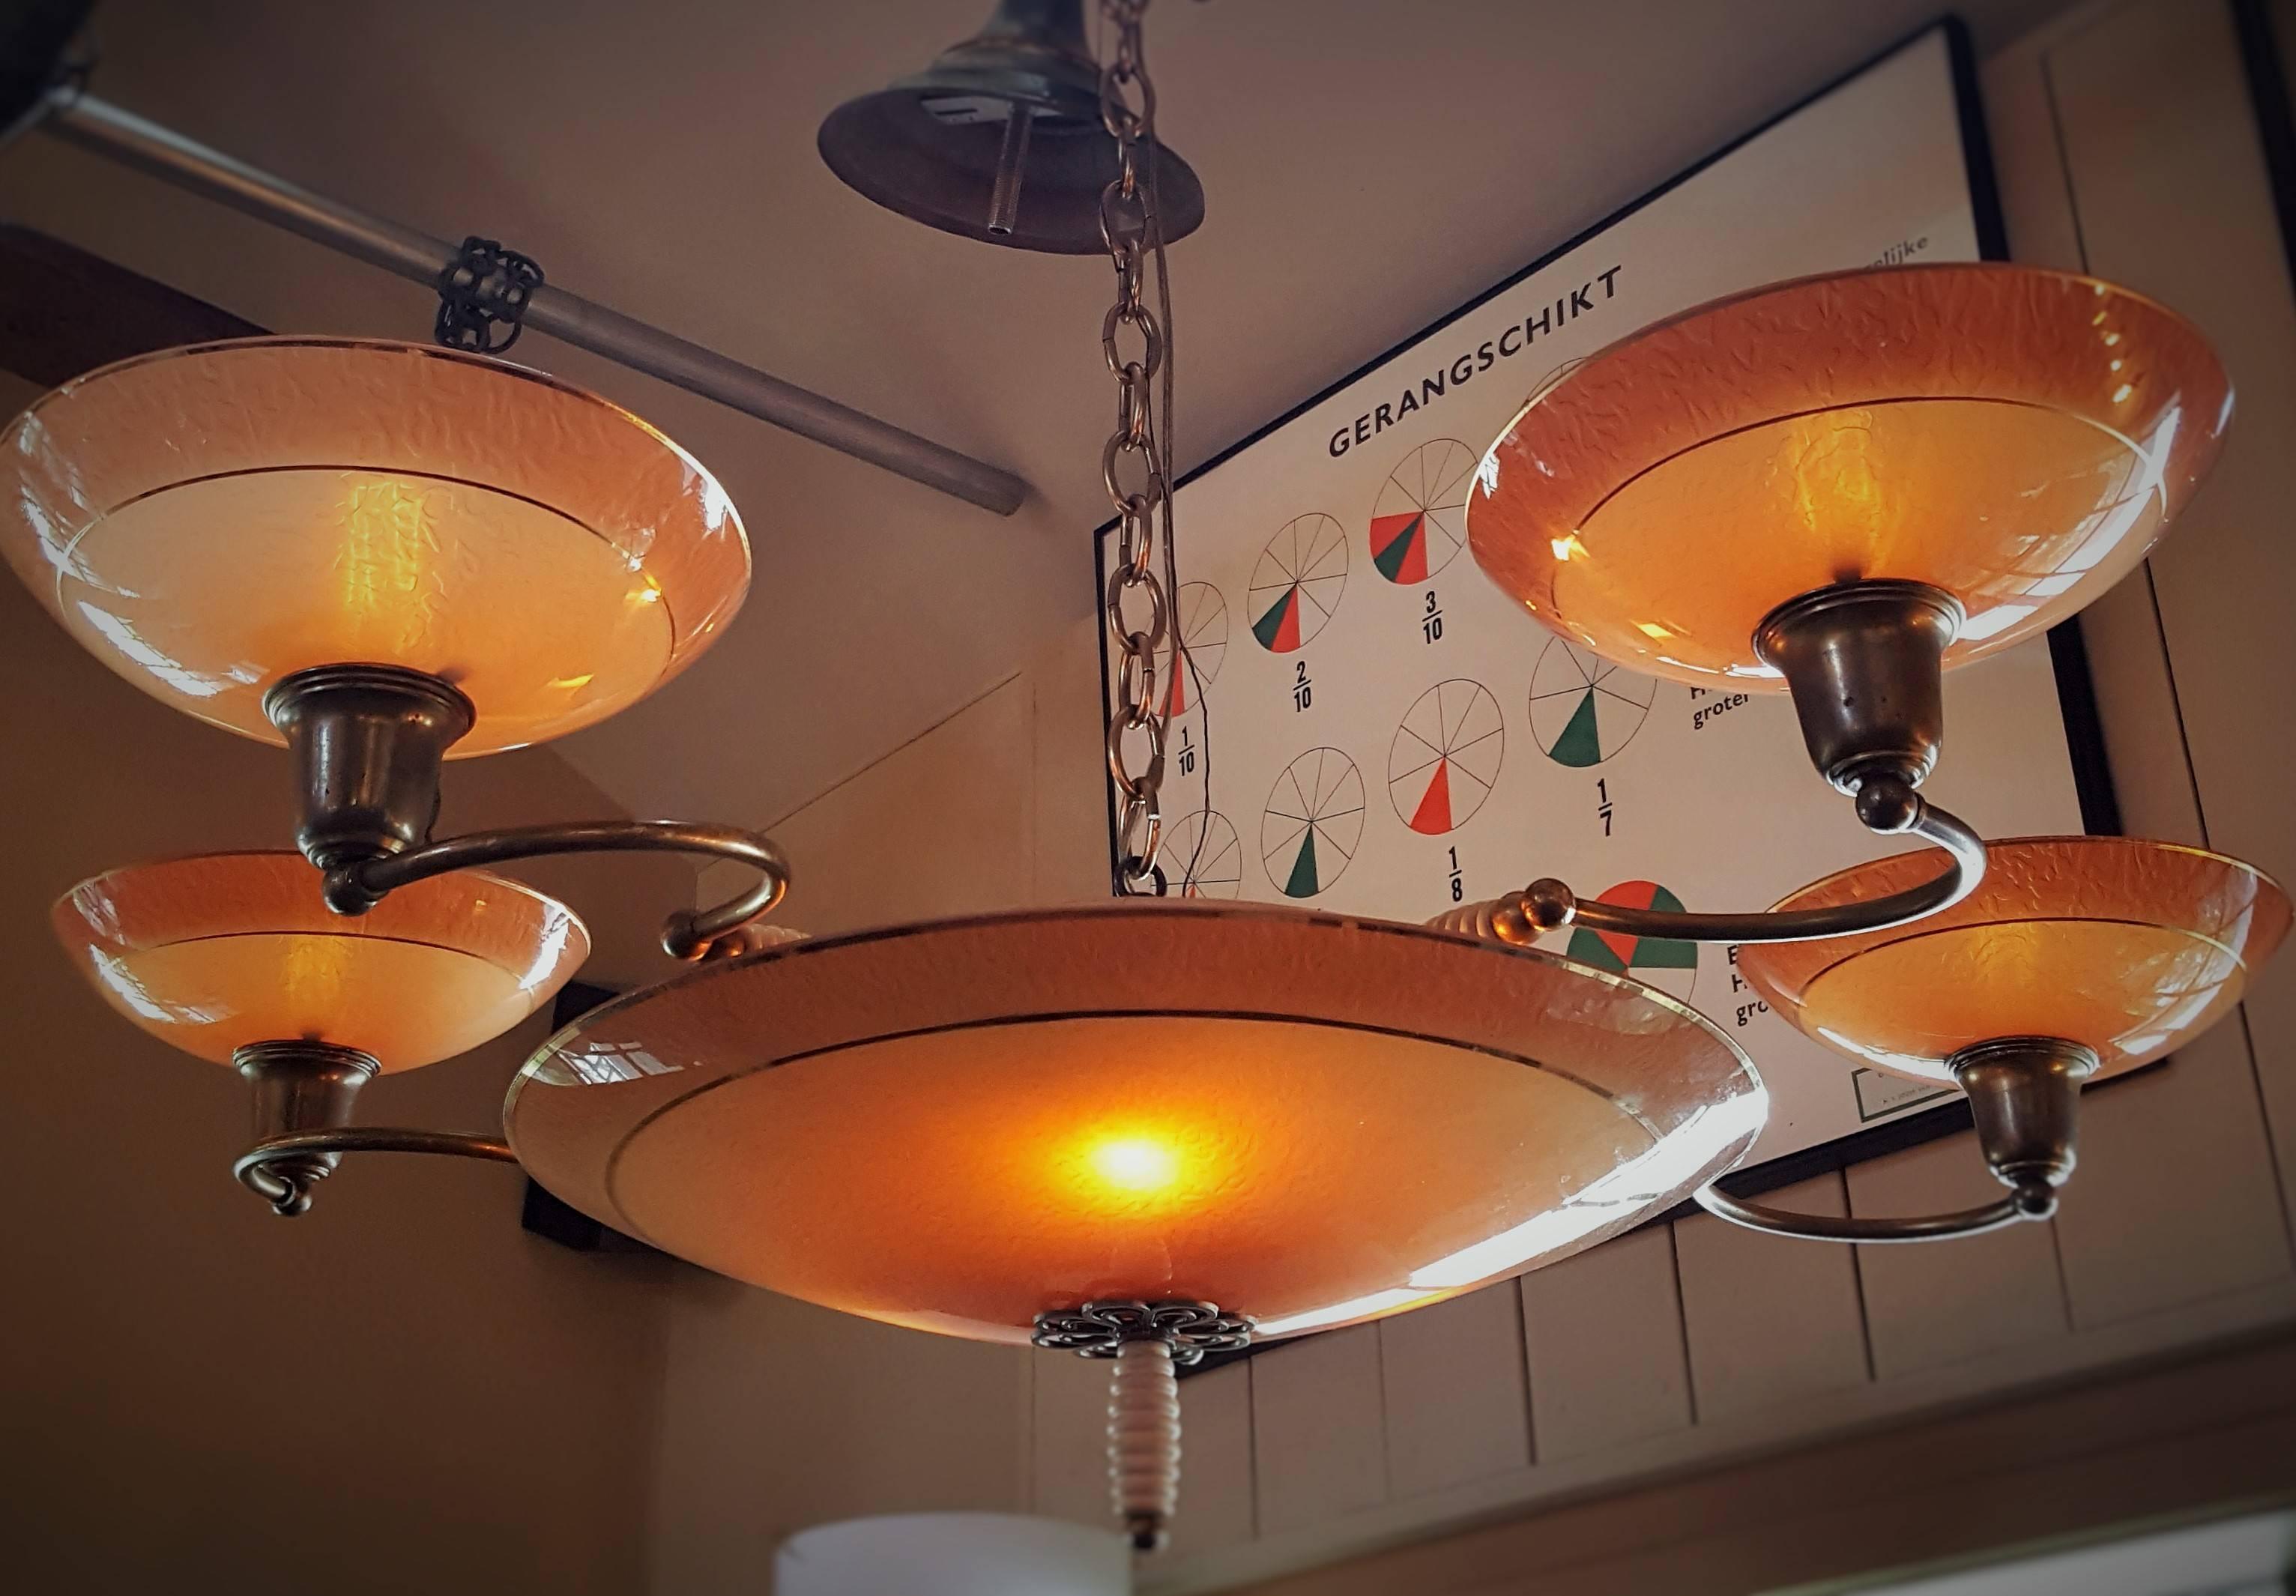 Unusual eight-light chandelier with apricot- salmon colored textured glass and gold accents. From France, circa 1940. Brass arms and detailing with a white wood twist finial at the base and on the arms. Comes with brass chain and canopy. Newly